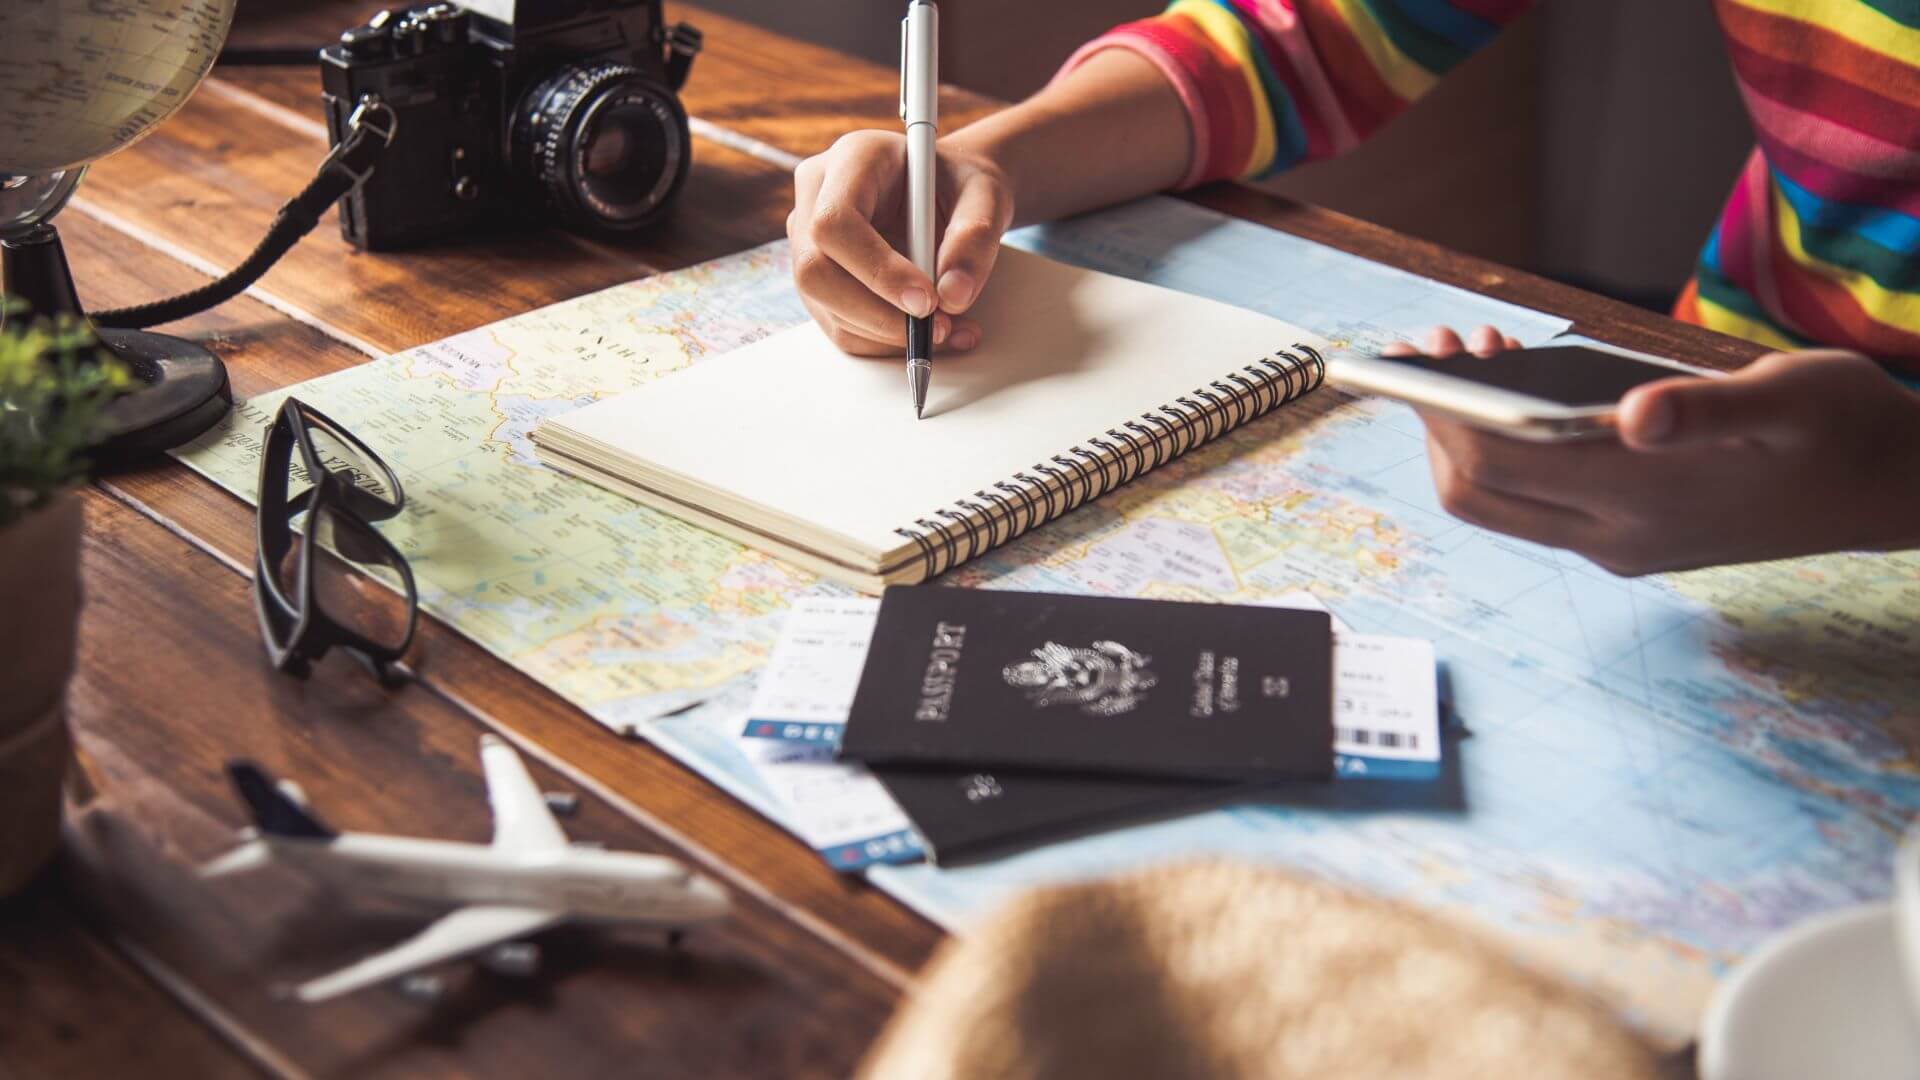 A person sitting at the table planning a vacation. There is a map, a passport, and two plane tickets on the table. This person is writing something dowin into an empty notebook.